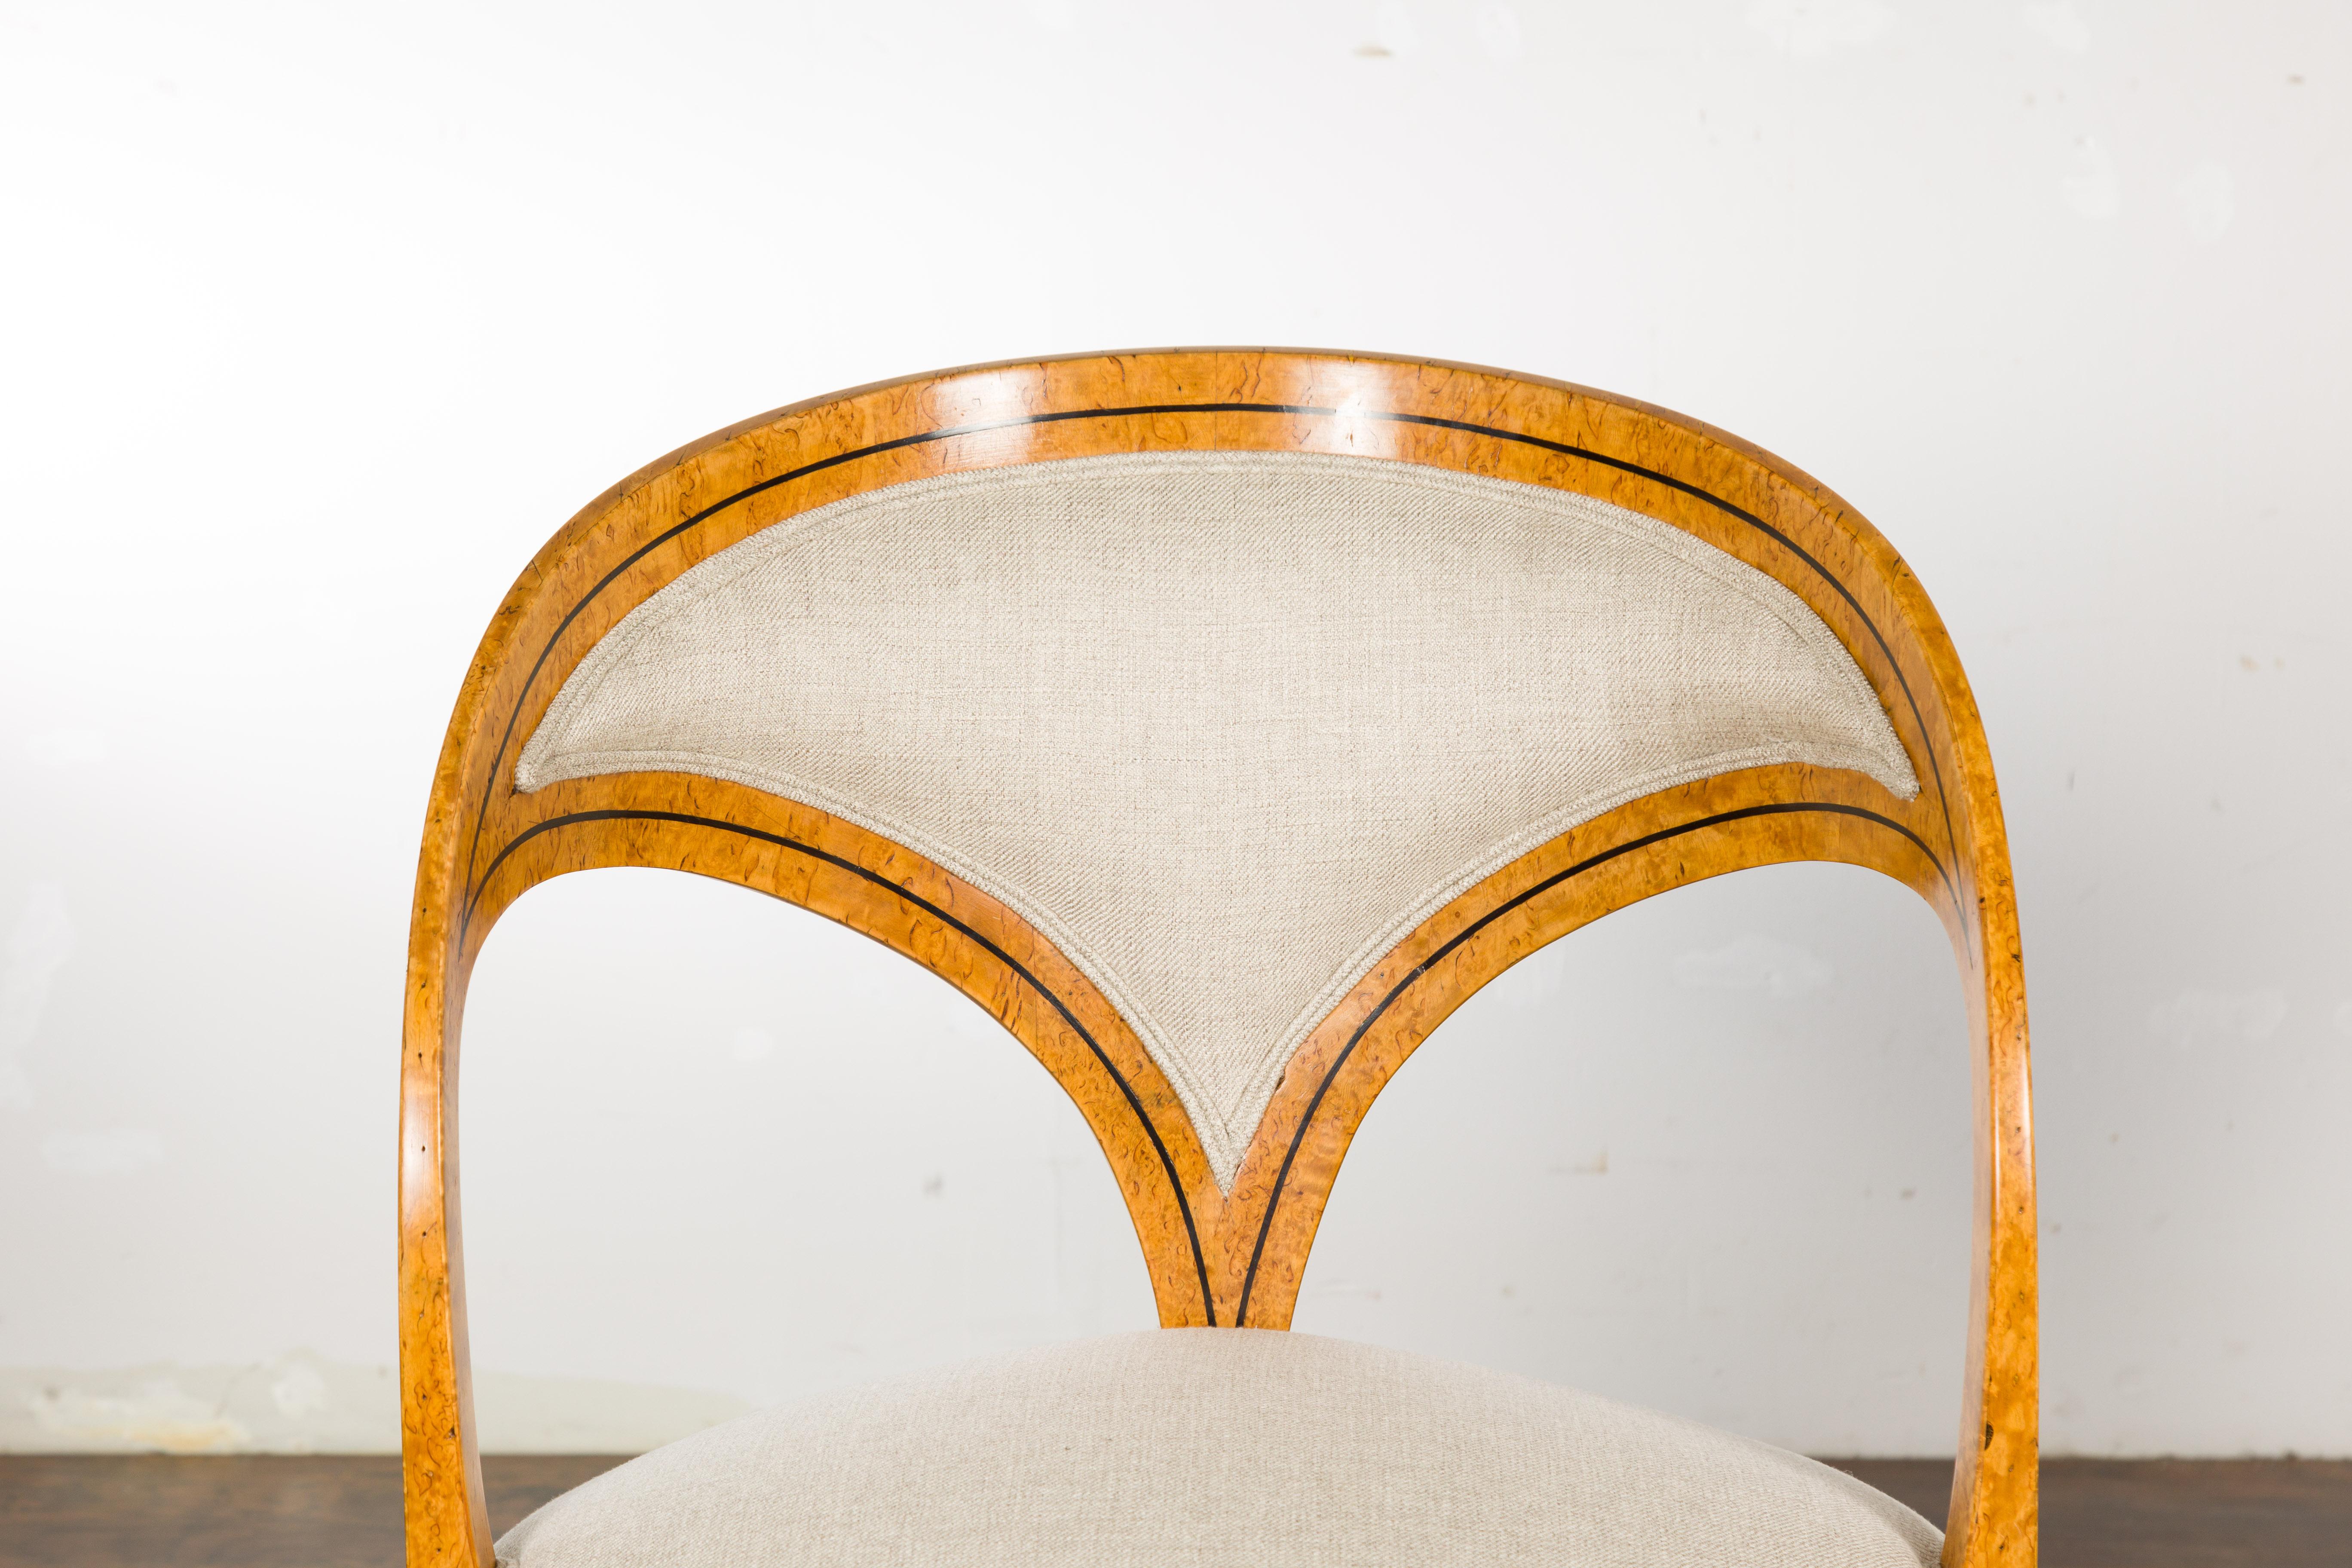 Biedermeier 19th Century Chairs with Ebonized Accents and New Upholstery, a Pair For Sale 1